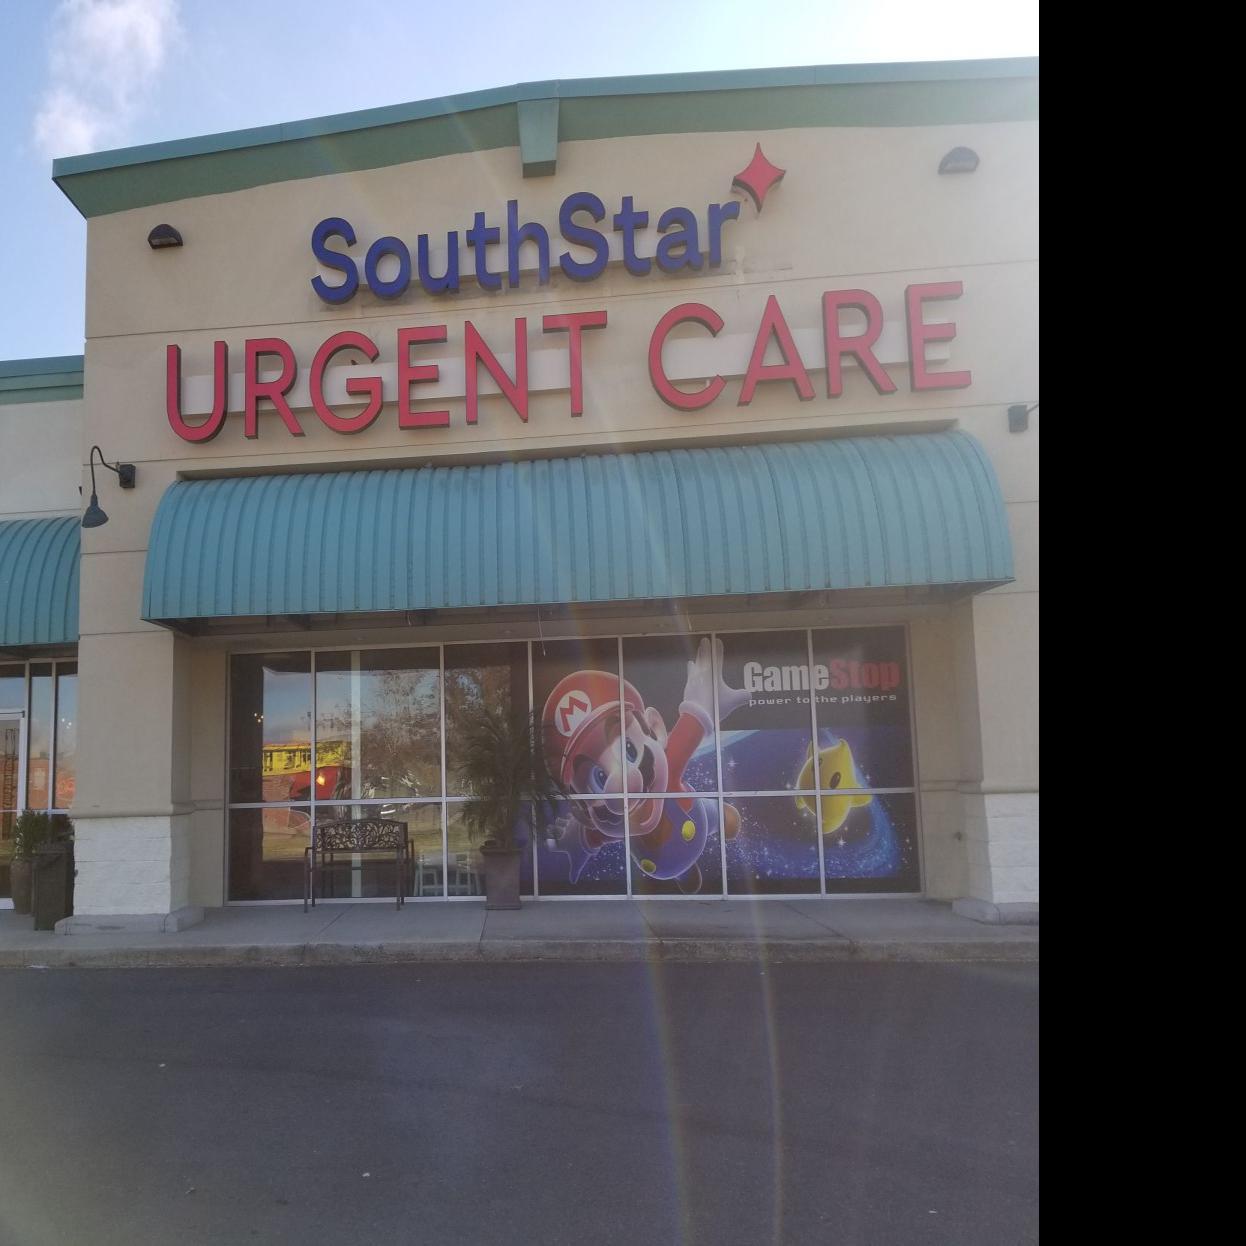 Southstar Urgent Care To Add 26 More Locations Over 350 Jobs By End Of 2020 Business Theadvocate Com